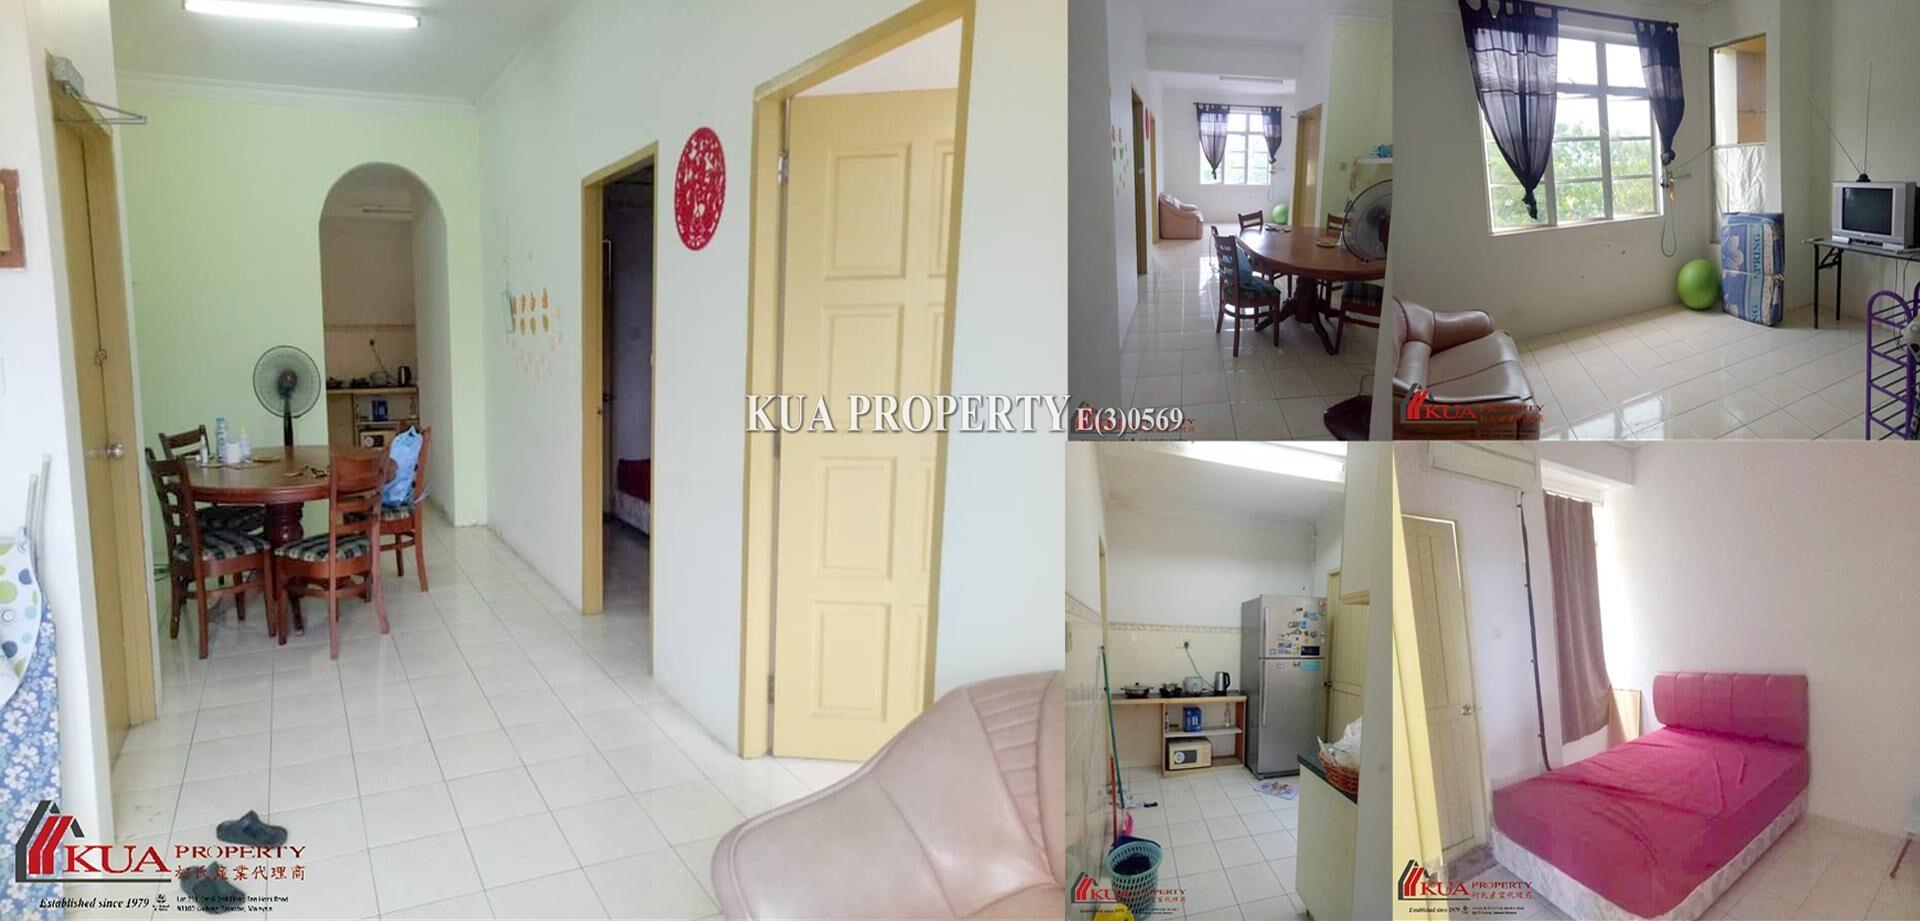 Third Floor Shophouse For Sale! at Synergy Square, Matang